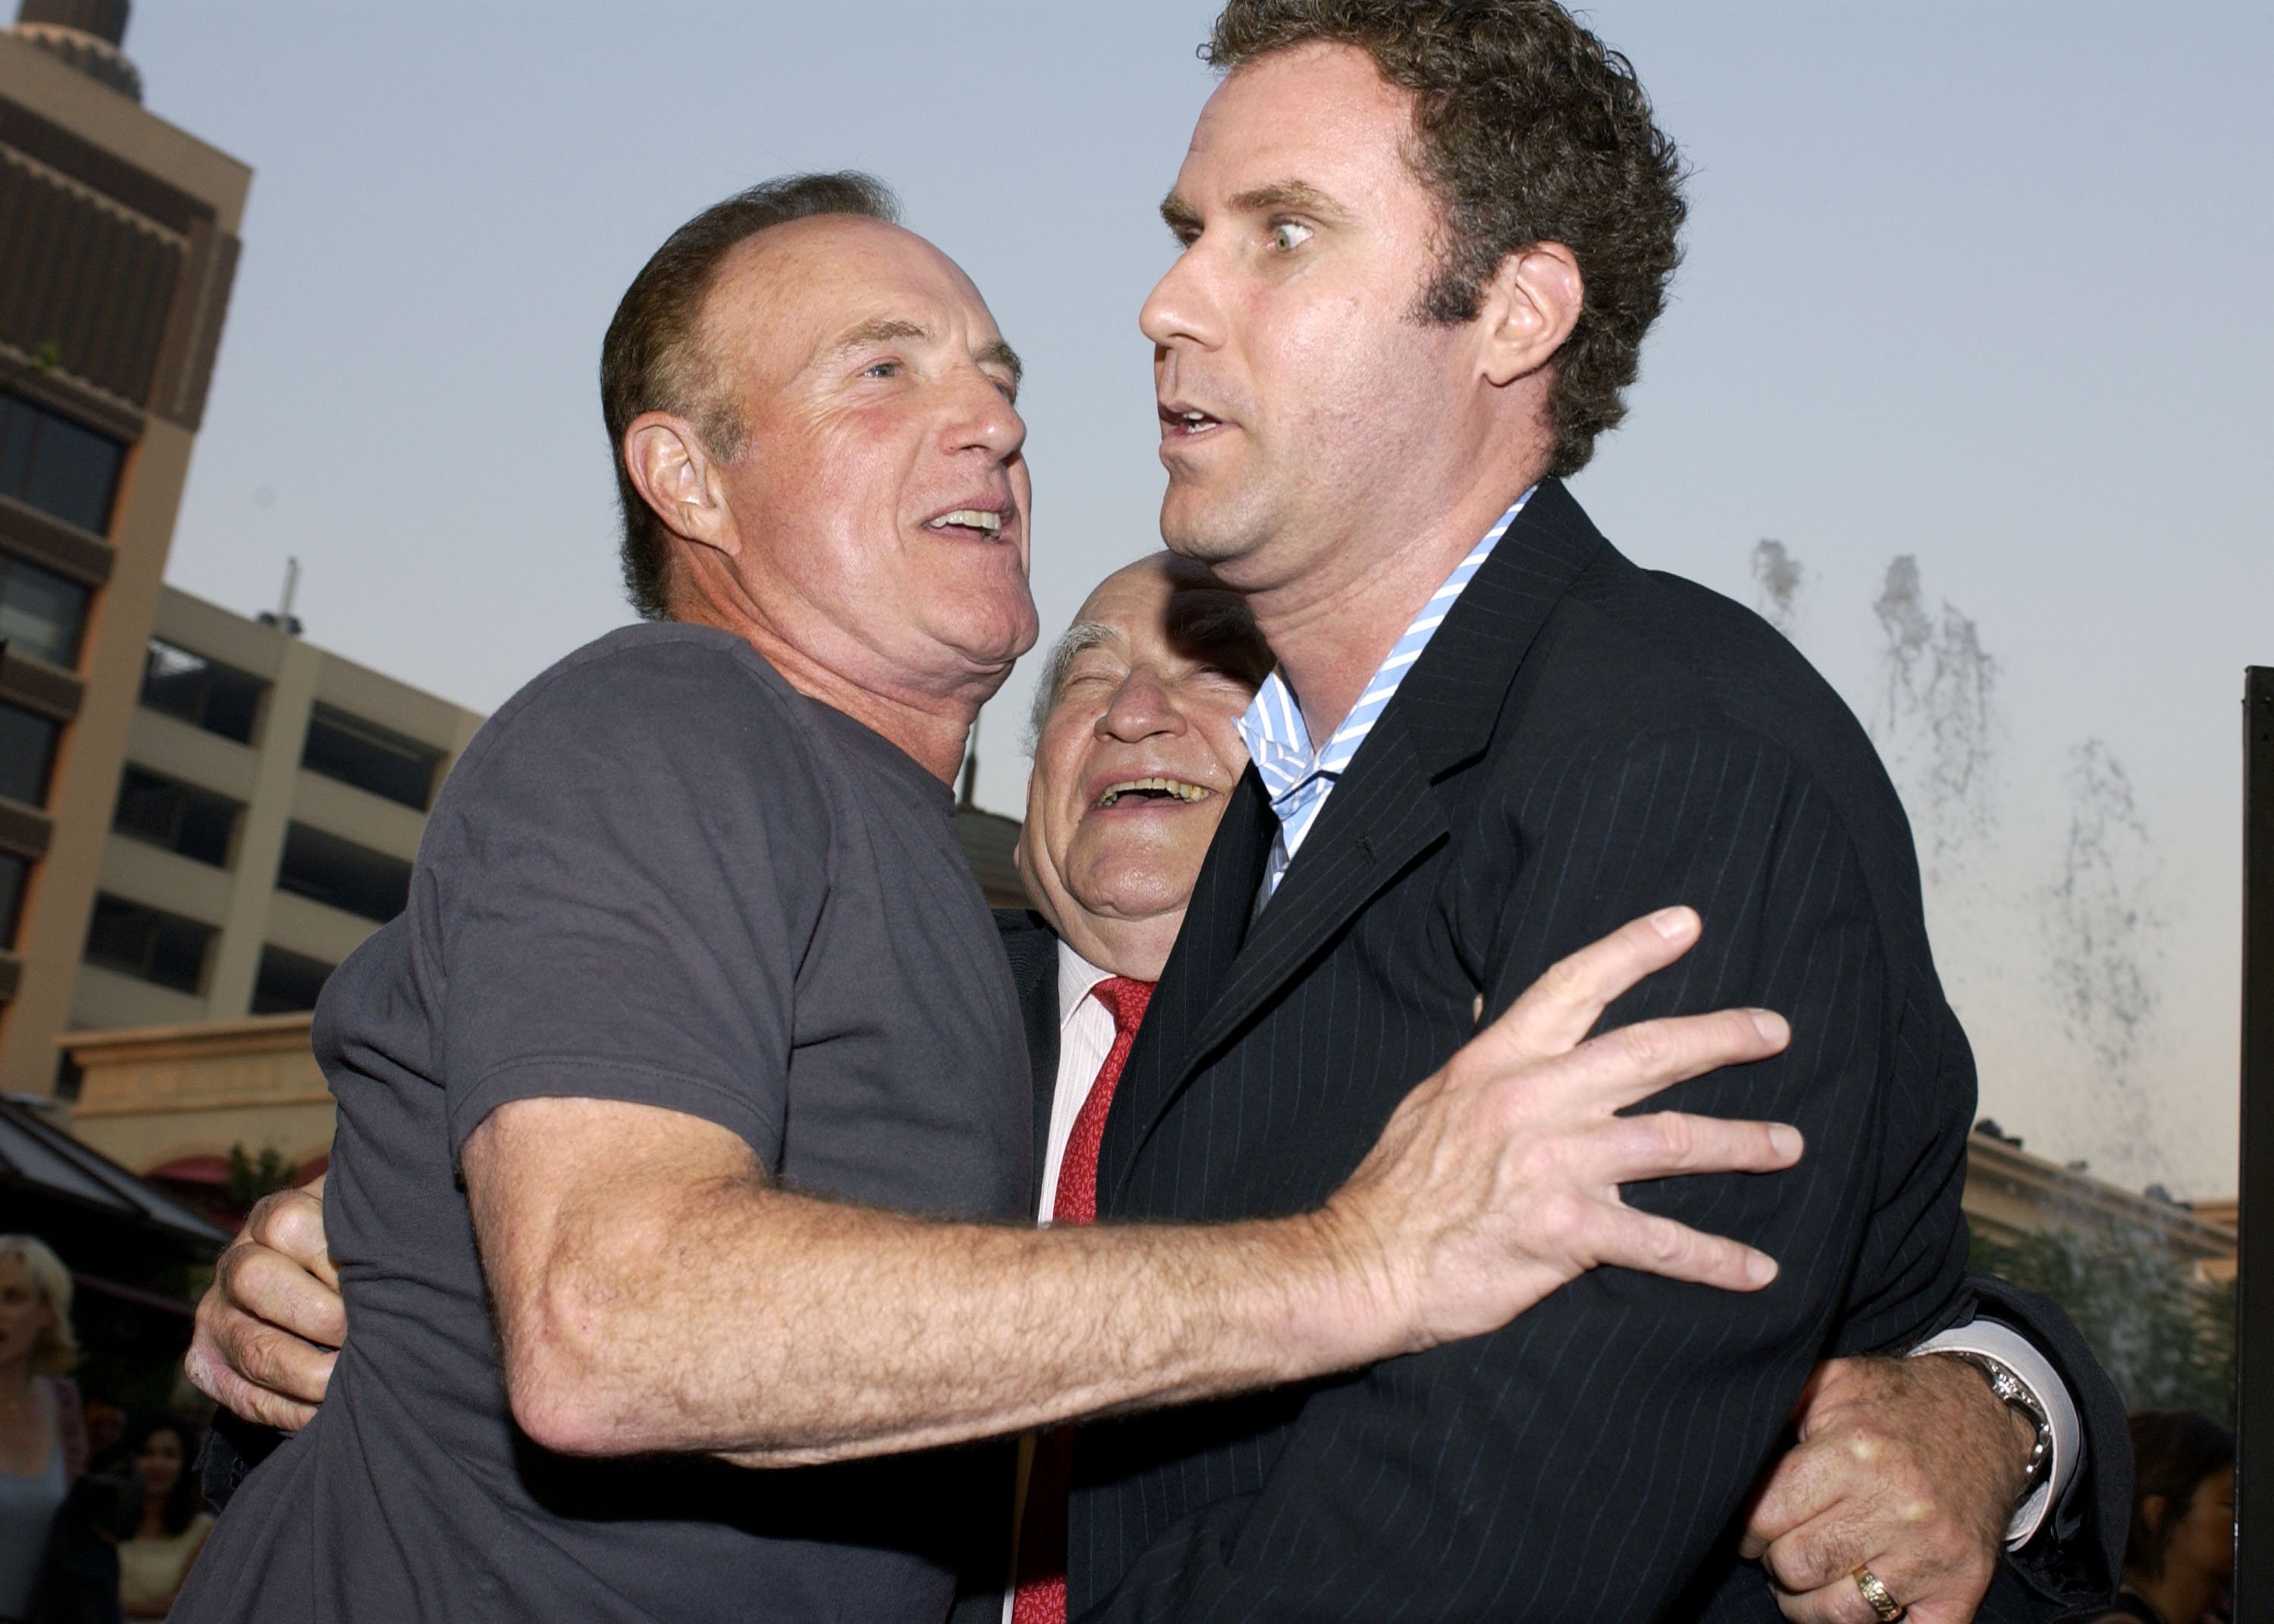 James Caan, Edward Asner and Will Ferrell during 'Elf' Special Screening